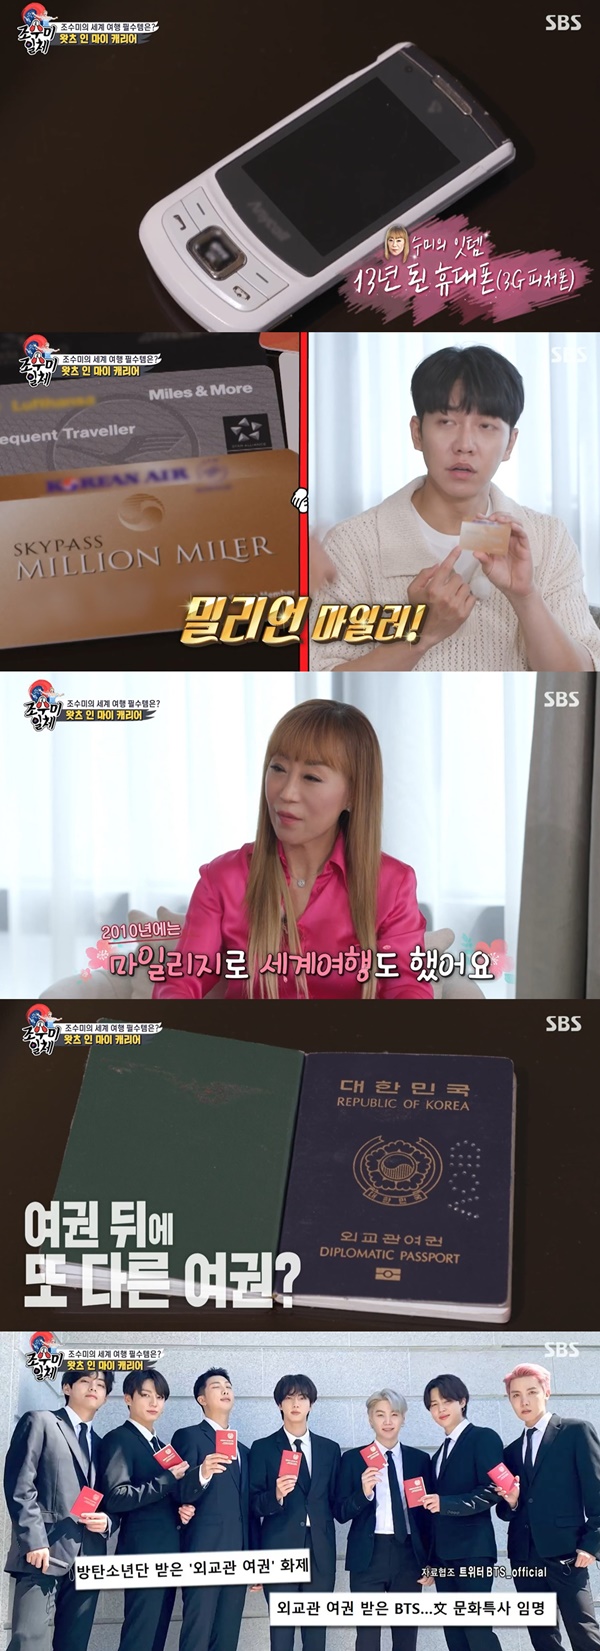 All The Butlers Sumi Jo reveals Million Millar card and diplomat passportOn the evening of the 19th, SBS entertainment program All The Butlers appeared as a guest by vocalist Sumi Jo.On the day, Sumi Jo was surprised to see the old model cell phone in the pouch.Its a slide phone, I havent seen it in too long, said Kang Seung-yoon, who saw Sumi Jos cell phone in 13 years.When Sumi Jo said, It is always a phone used when you come to Korea, Eun Ji-won said, It is 3G and 4G, and there is no such thing.Alongside this, Sumi Jos Planes Mileage was also revealed; he showed the Million Mileer card.Million Miles cards are credited to members who are over 1 million miles and will be accumulated 143 times from Incheon to New York.In addition to his personal passport, Sumi Jo also showed a diplomat passport that was excluded from the inspection of his belongings, and offered immunity, saying, It was because he was an ambassador for Korea image.The diplomats passport was also reported to have received the group BTS.